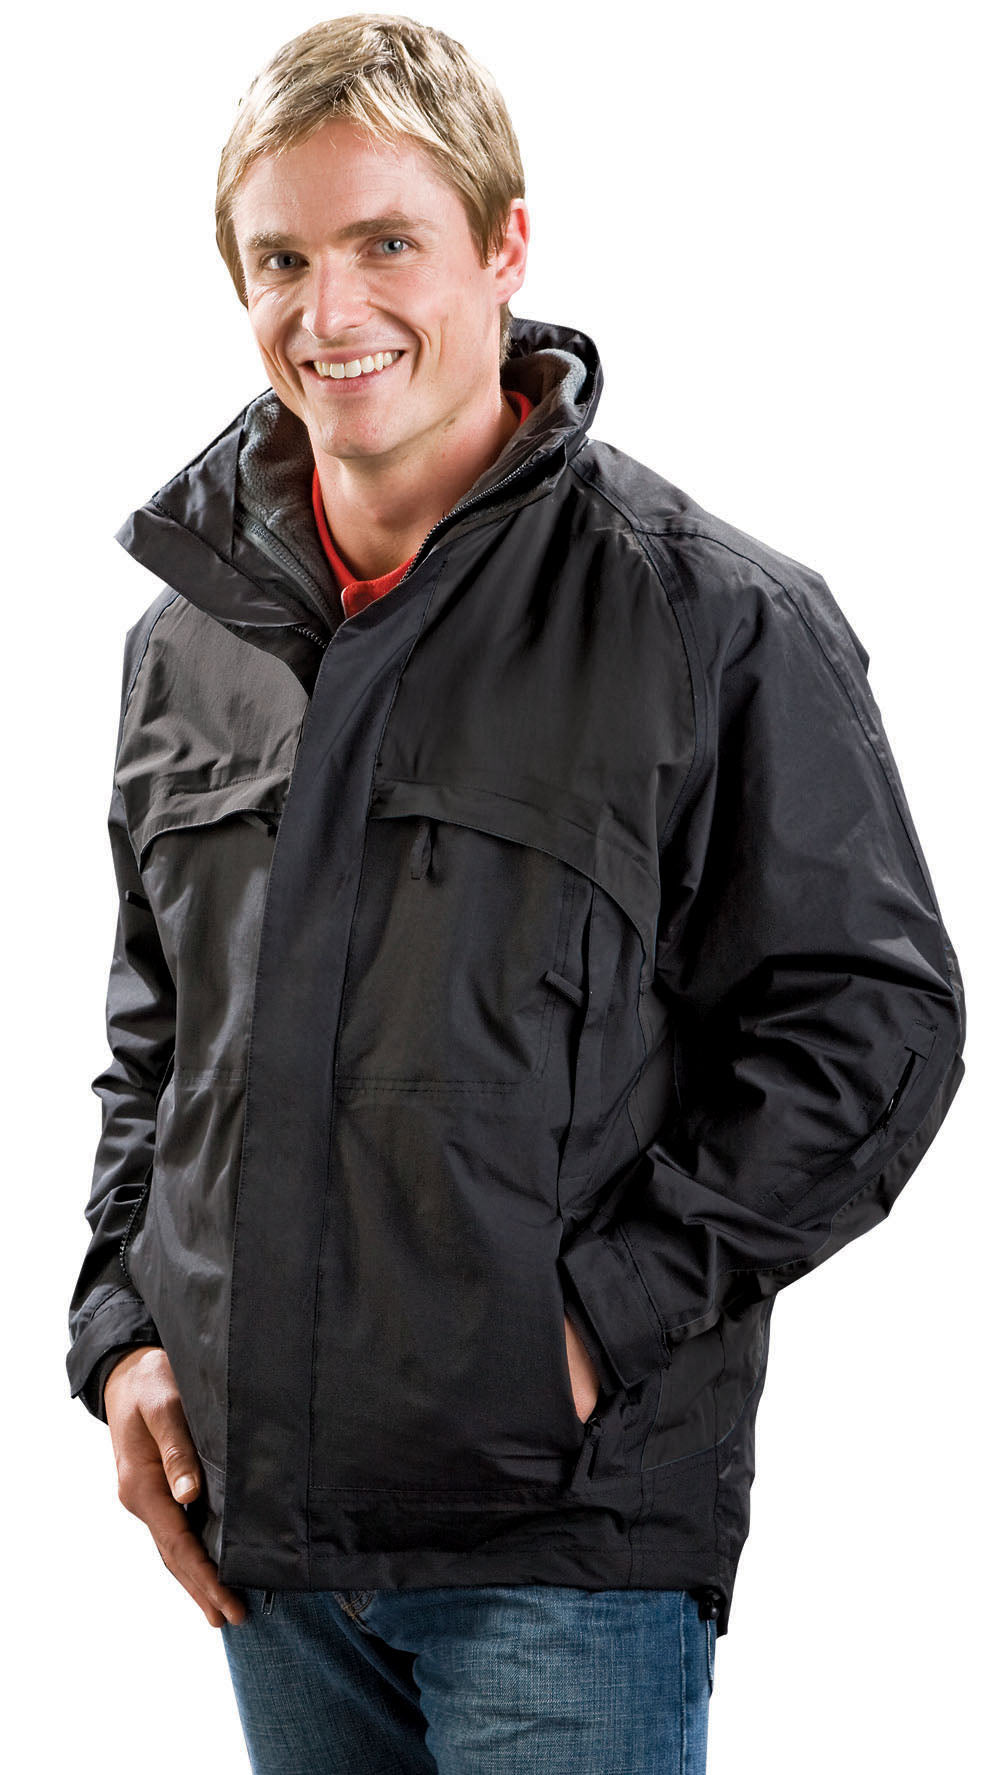 Competitor Jacket